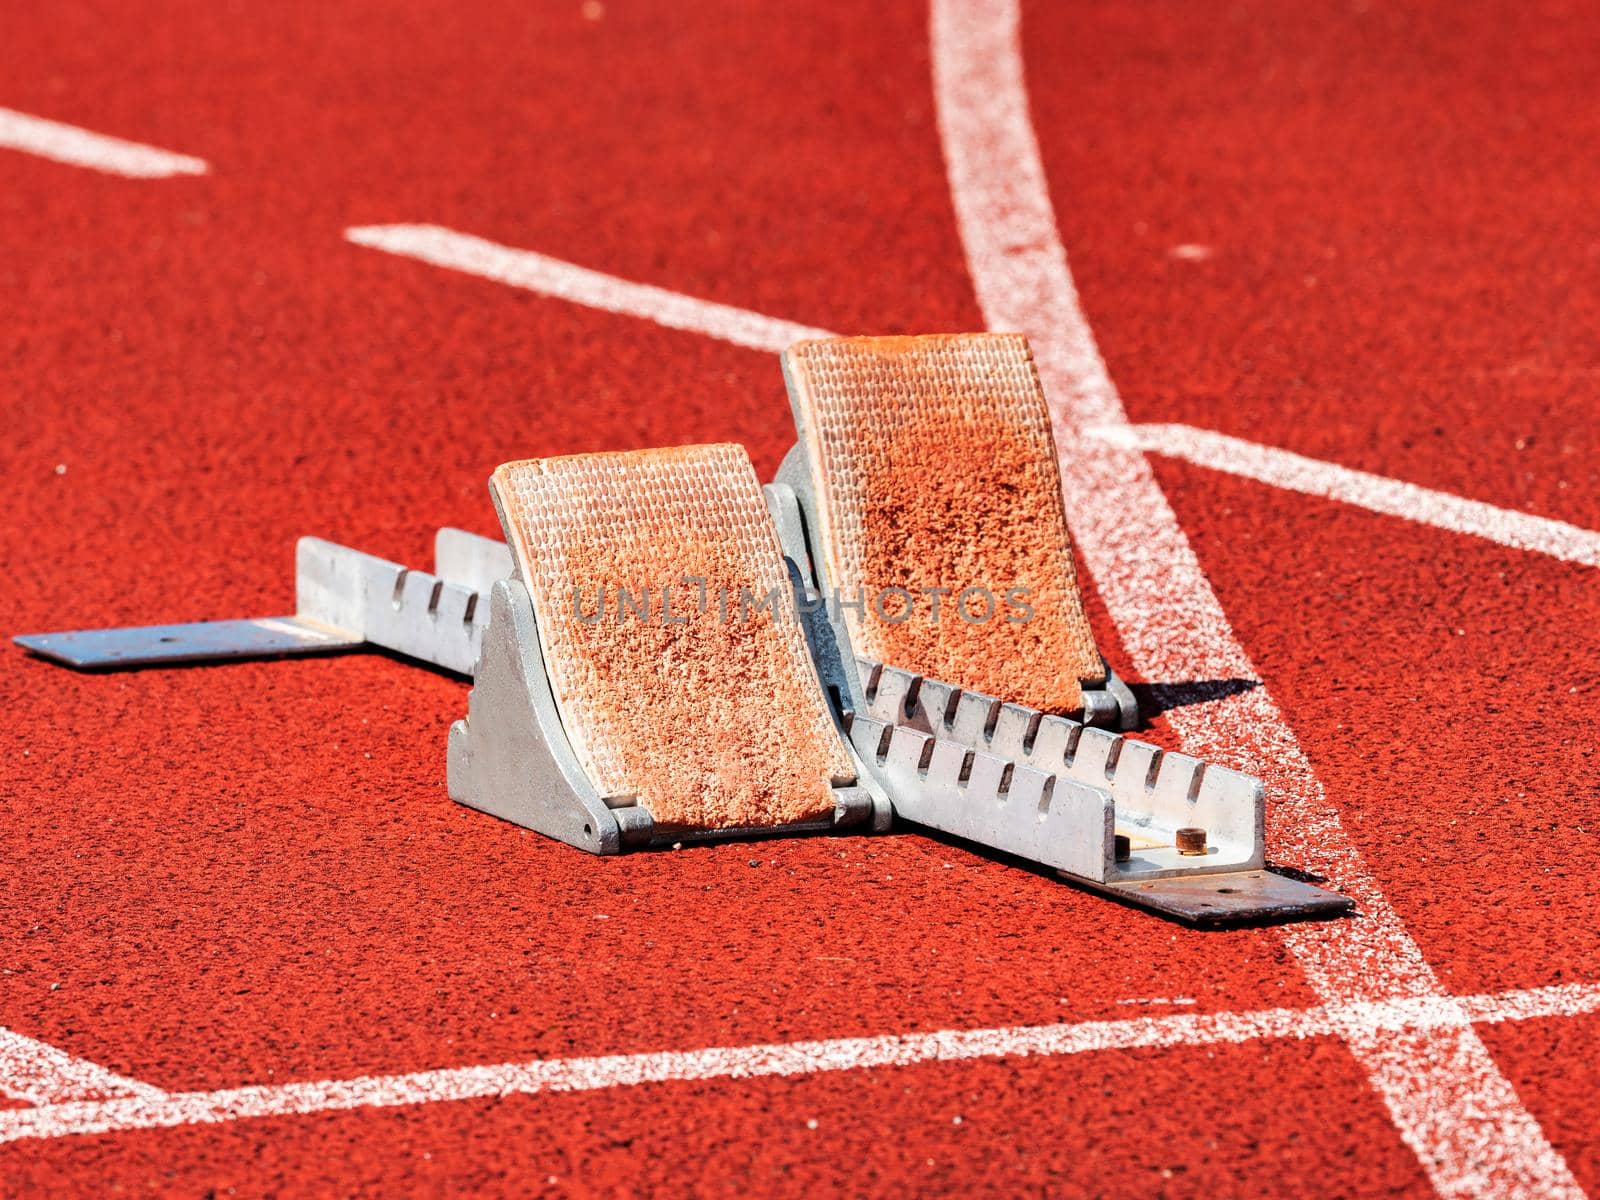 Side view of worn out starting blocks on running tracks. Red running tracks lanes at track and field stadium. Sport accessory.